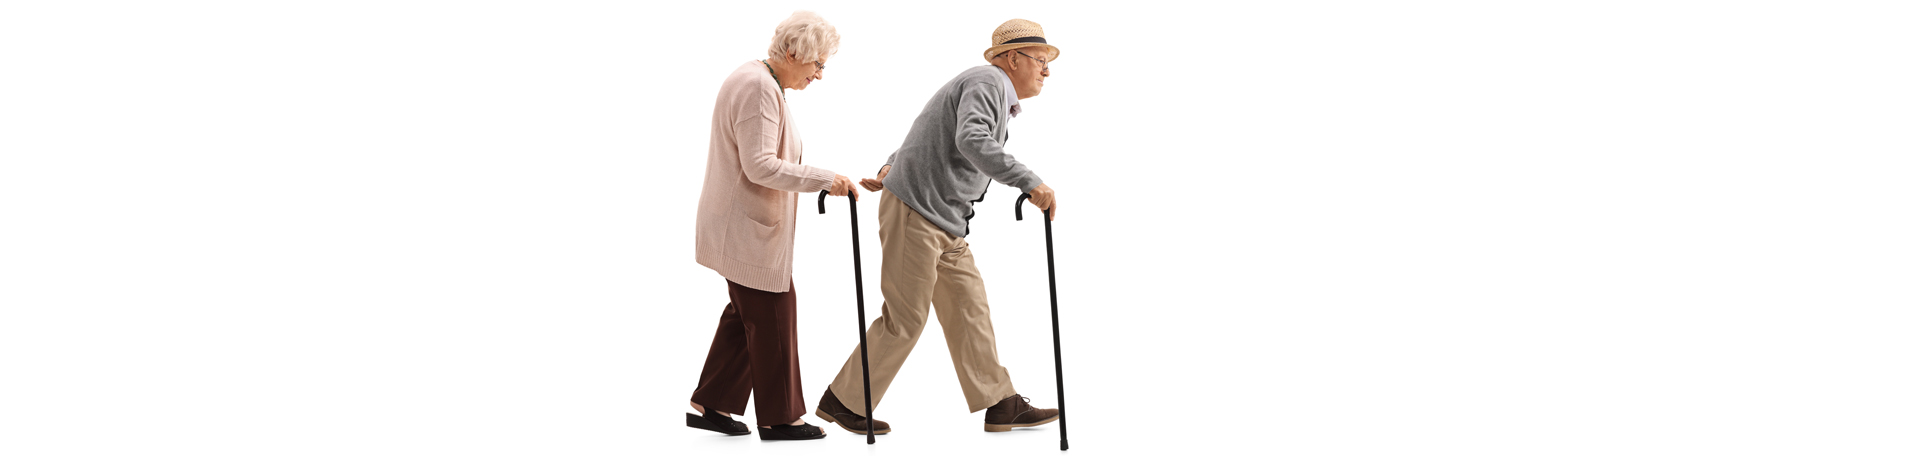 Augusta back pain affects gait and walking patterns